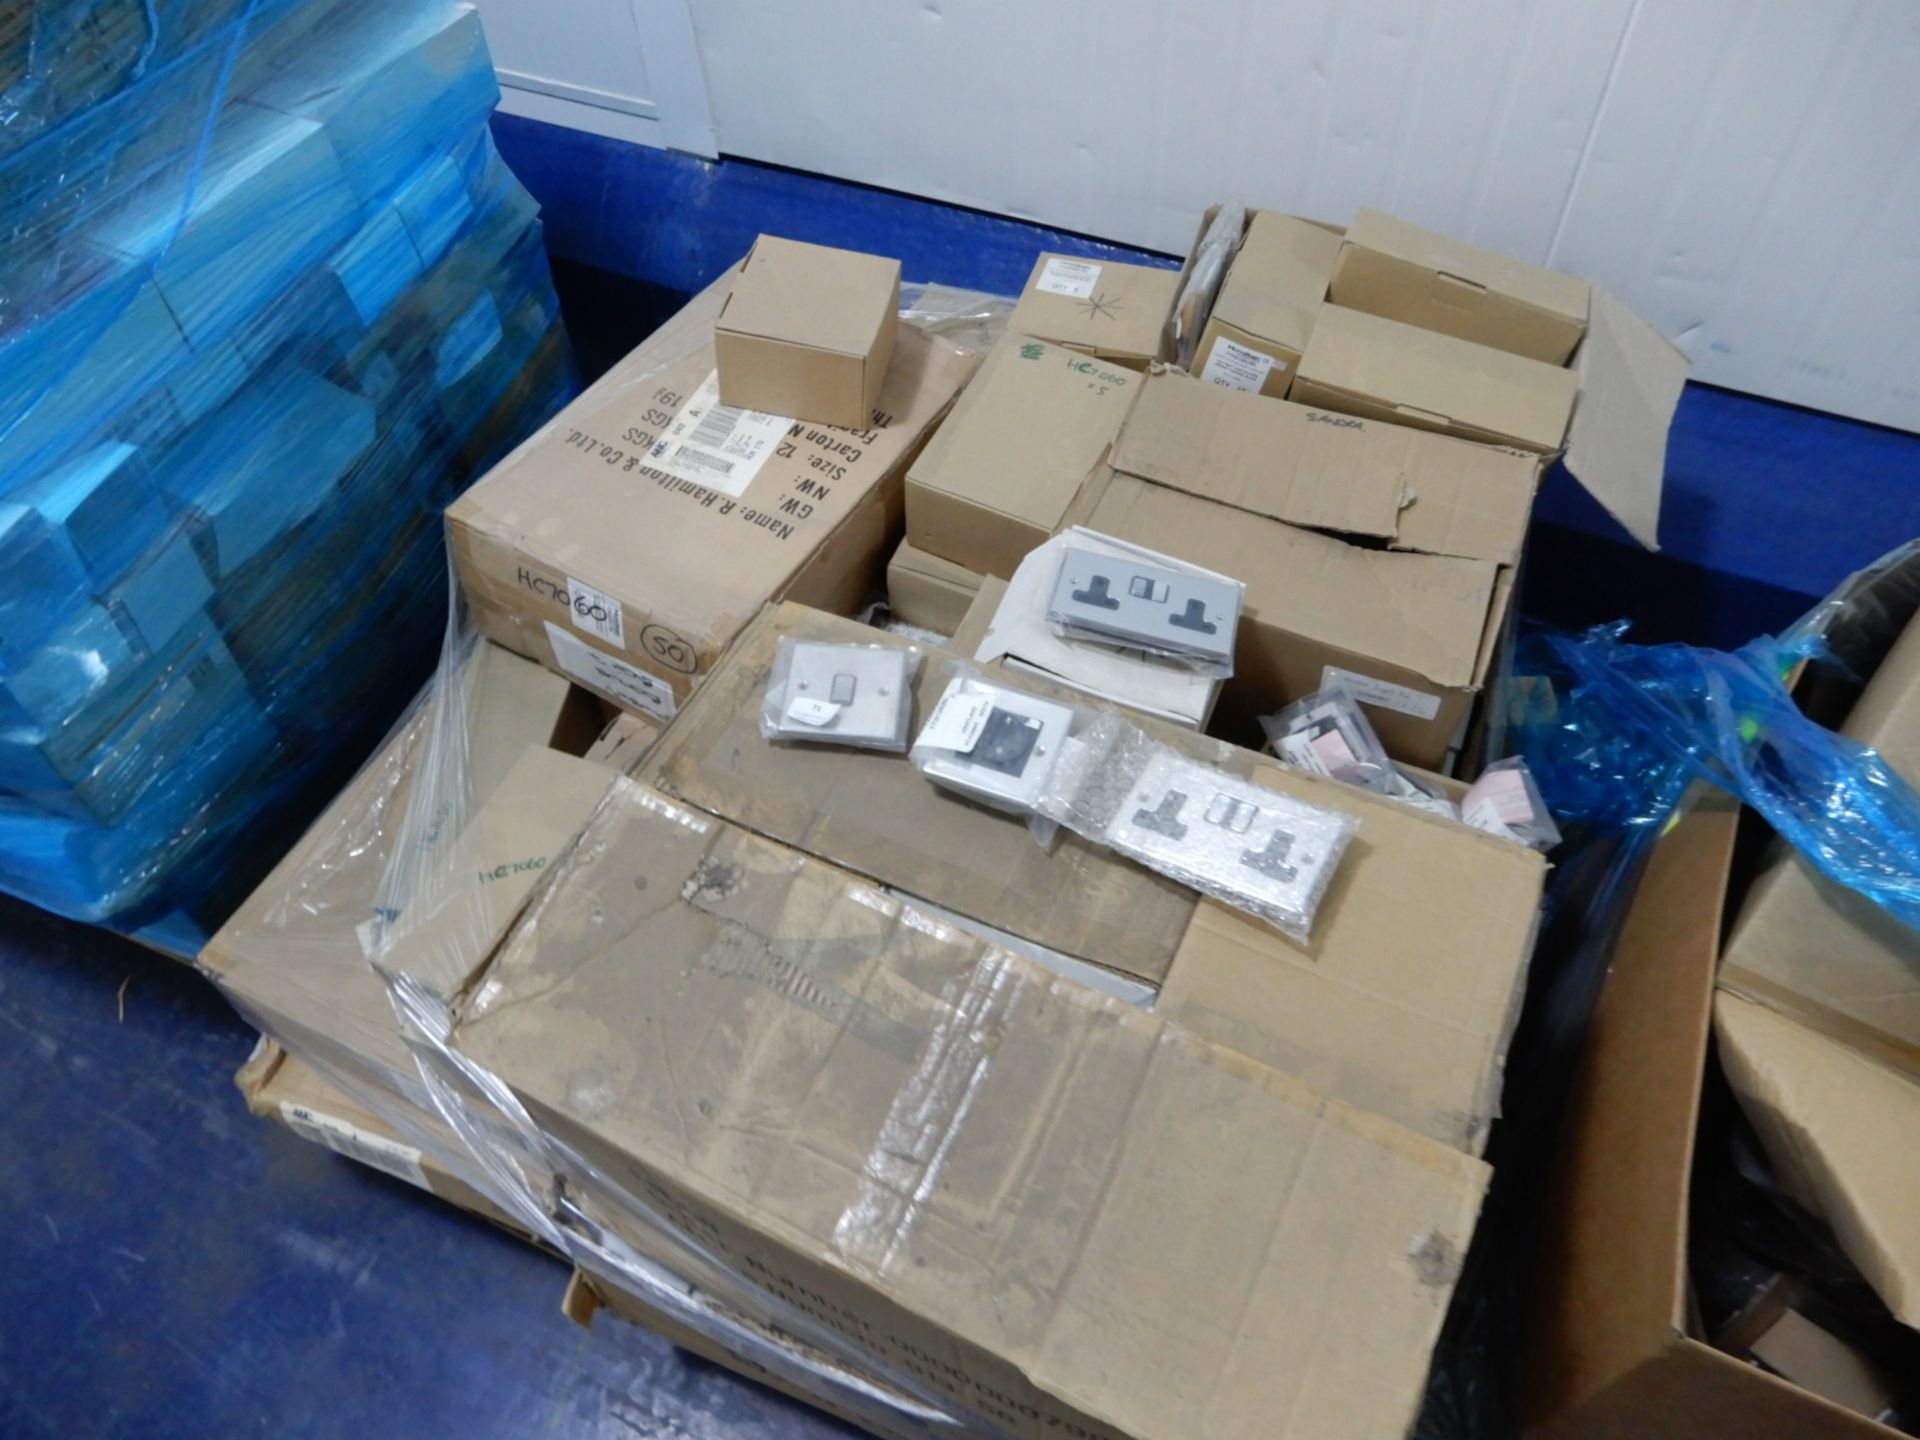 *Mixed Pallet of Light Fittings, European Sockets, Single Gang Light Switches, etc.